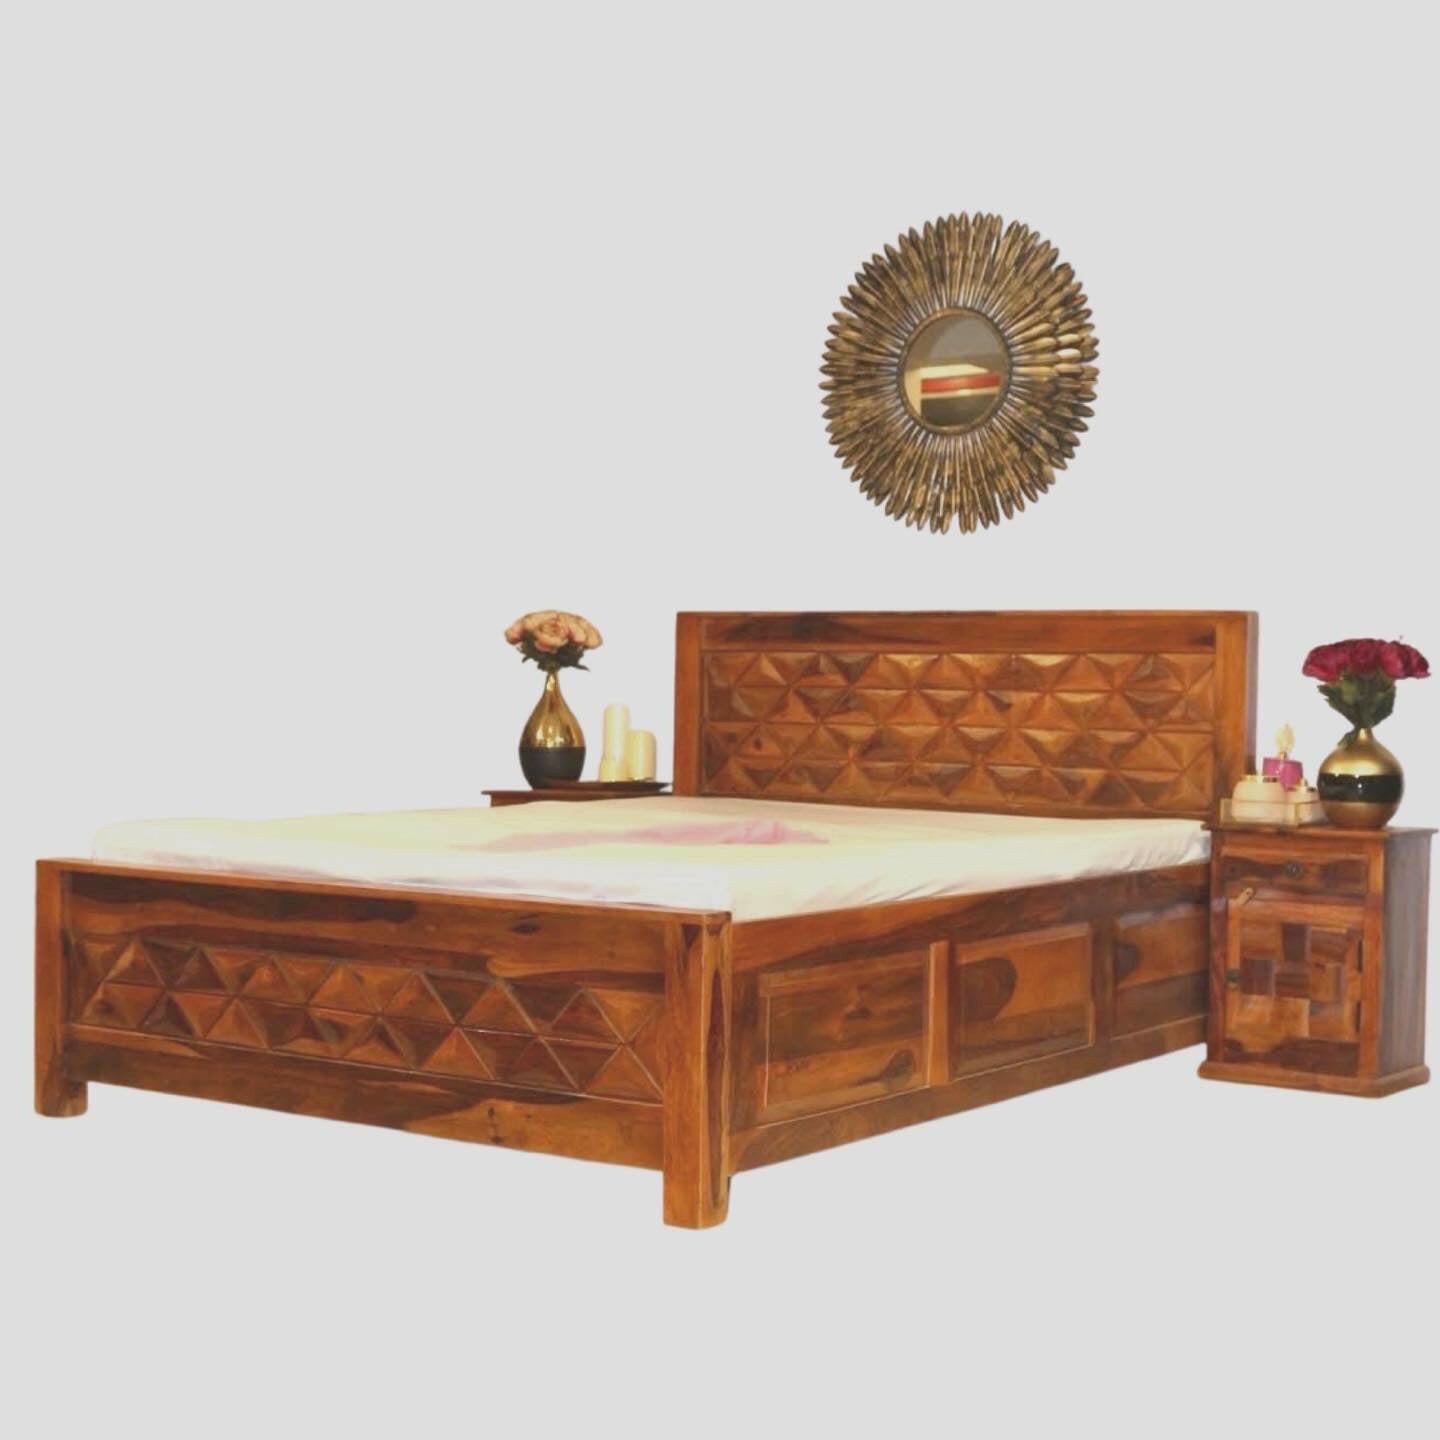 Discover exquisite designer wooden storage beds in king and queen sizes made from durable sheesham wood for durability and style. Upgrade your sleeping space now with ease, only near you in Bangalore!